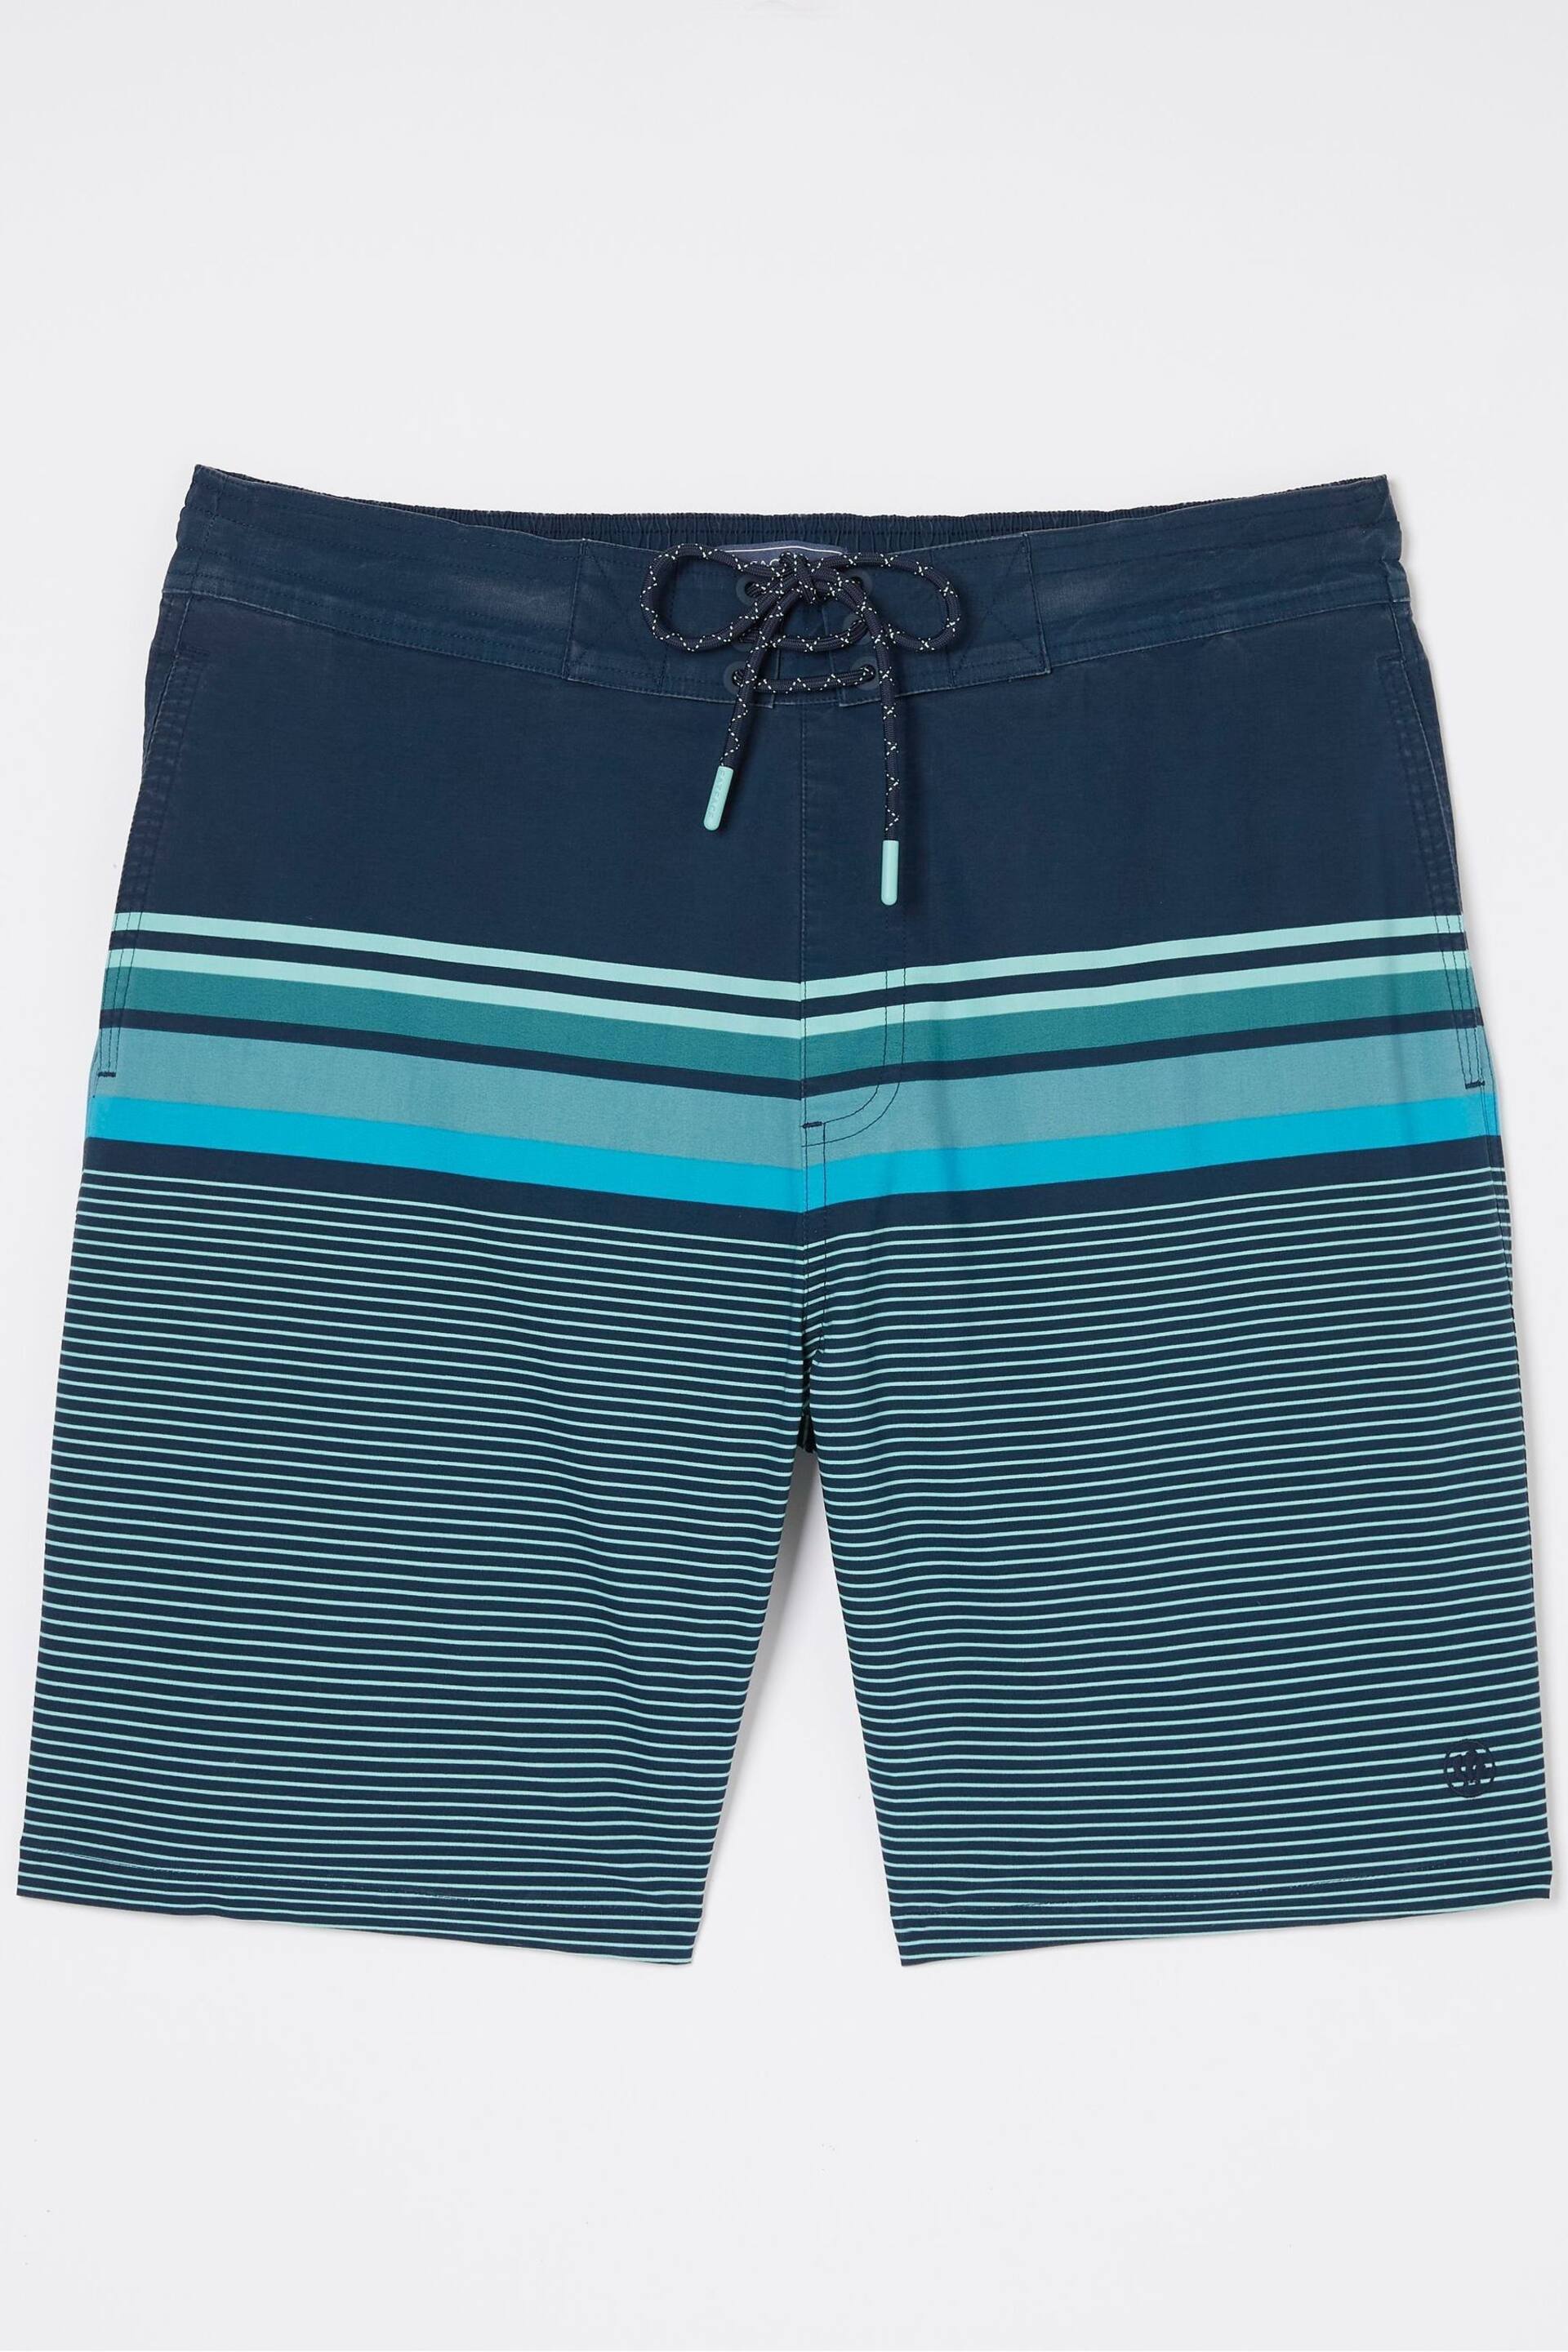 FatFace Blue Camber Placement Stripe Swim Shorts - Image 4 of 4